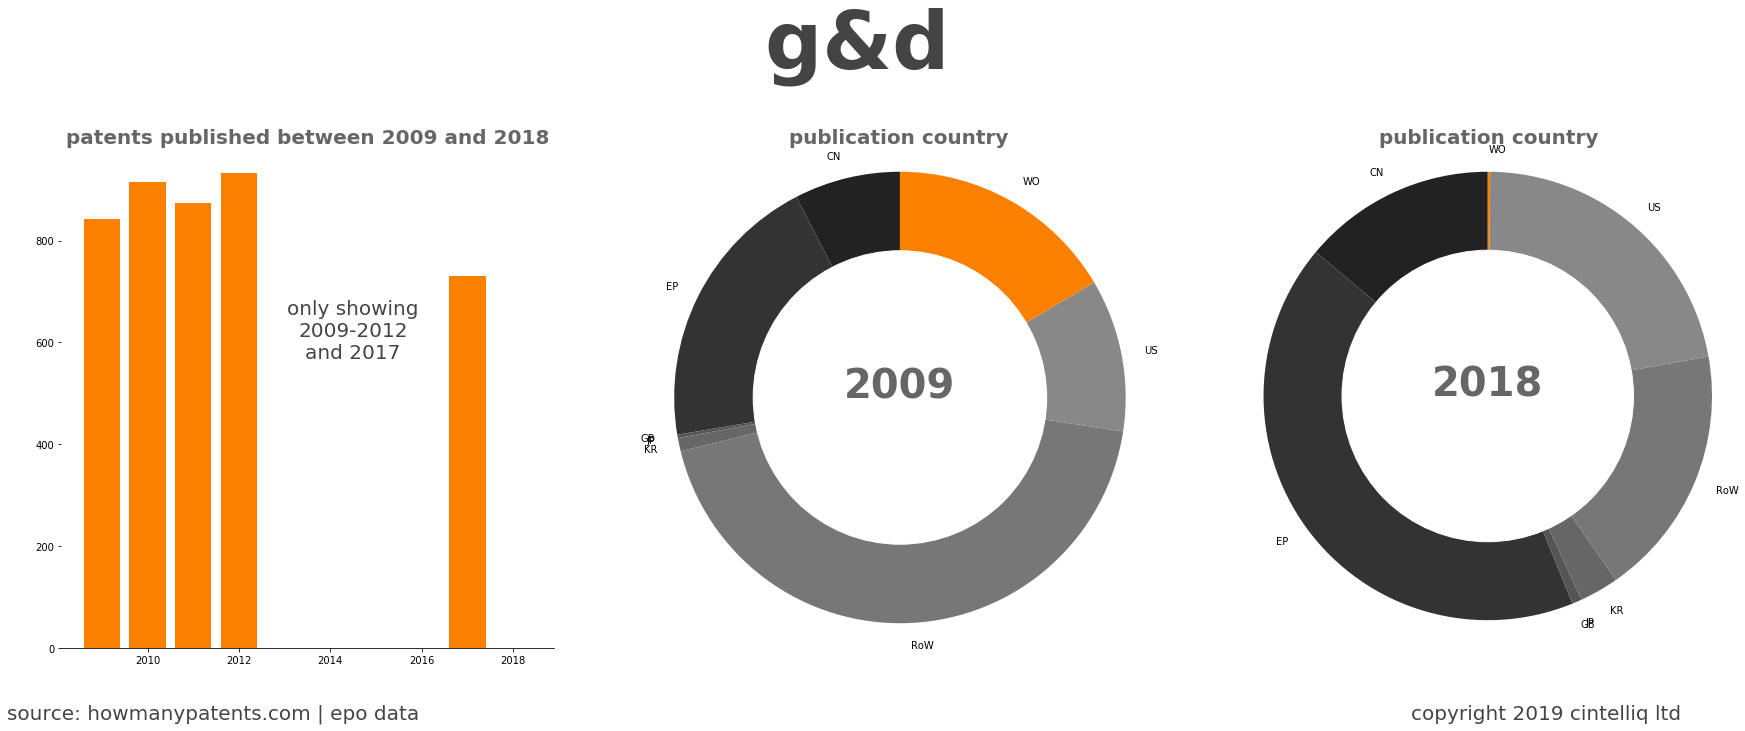 summary of patents for G&D 